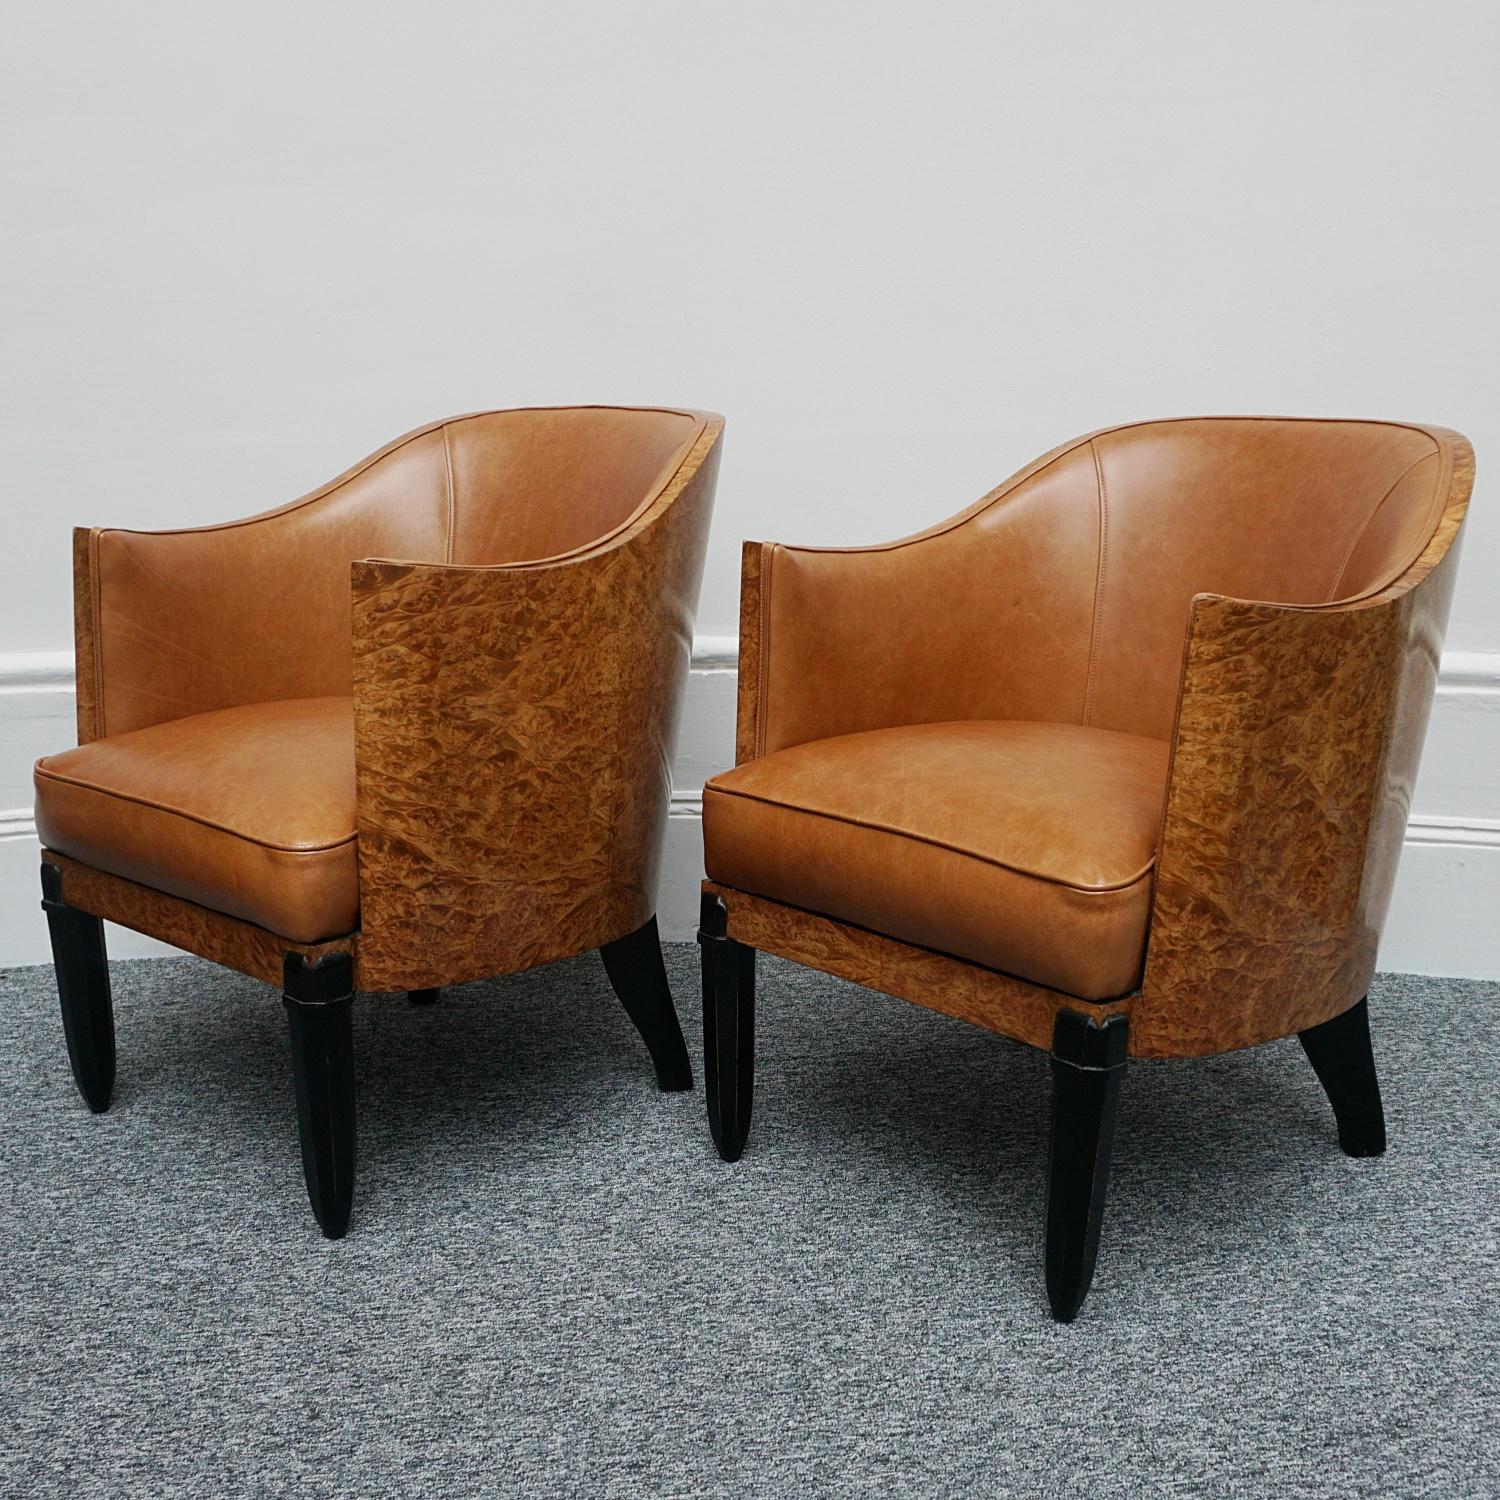 Original Pair of Walnut and Leather Art Deco Club Chairs  10